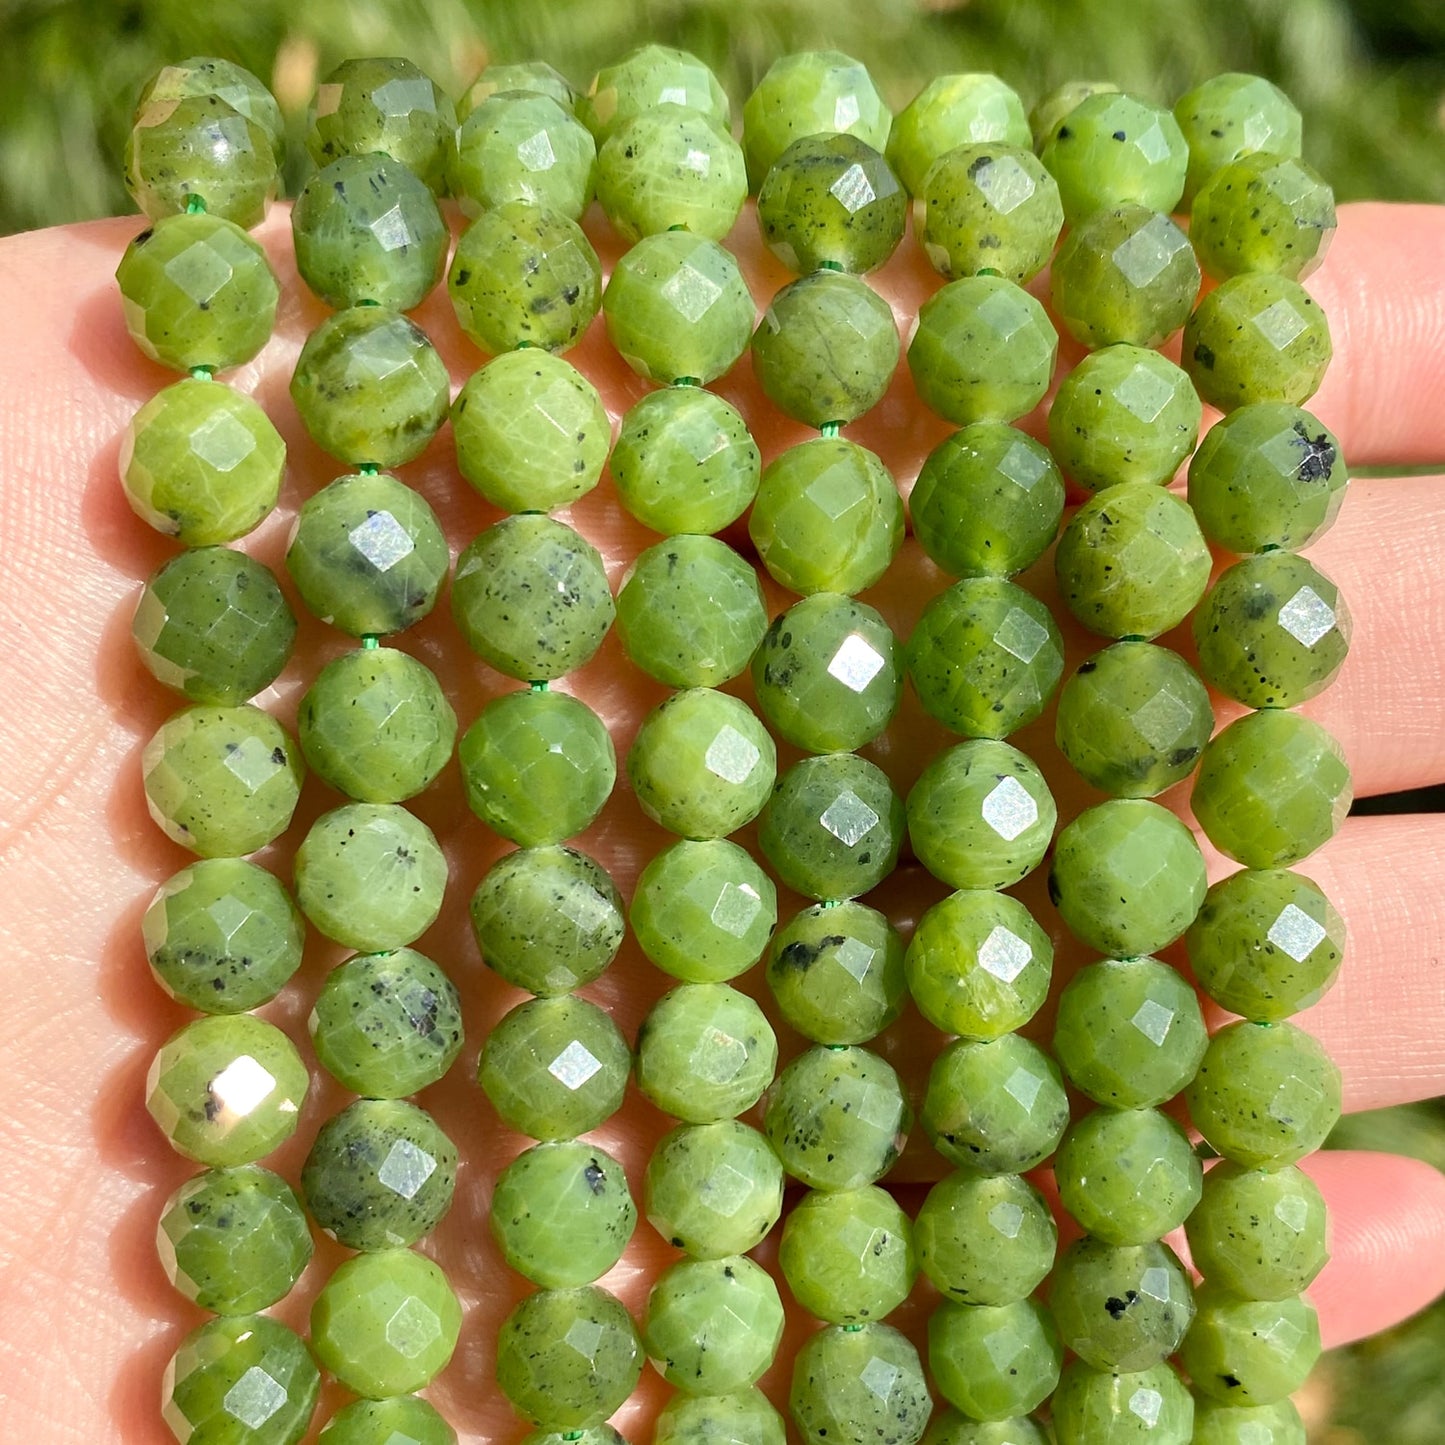 Natural Faceted Gem Canadian Jades Beads Round